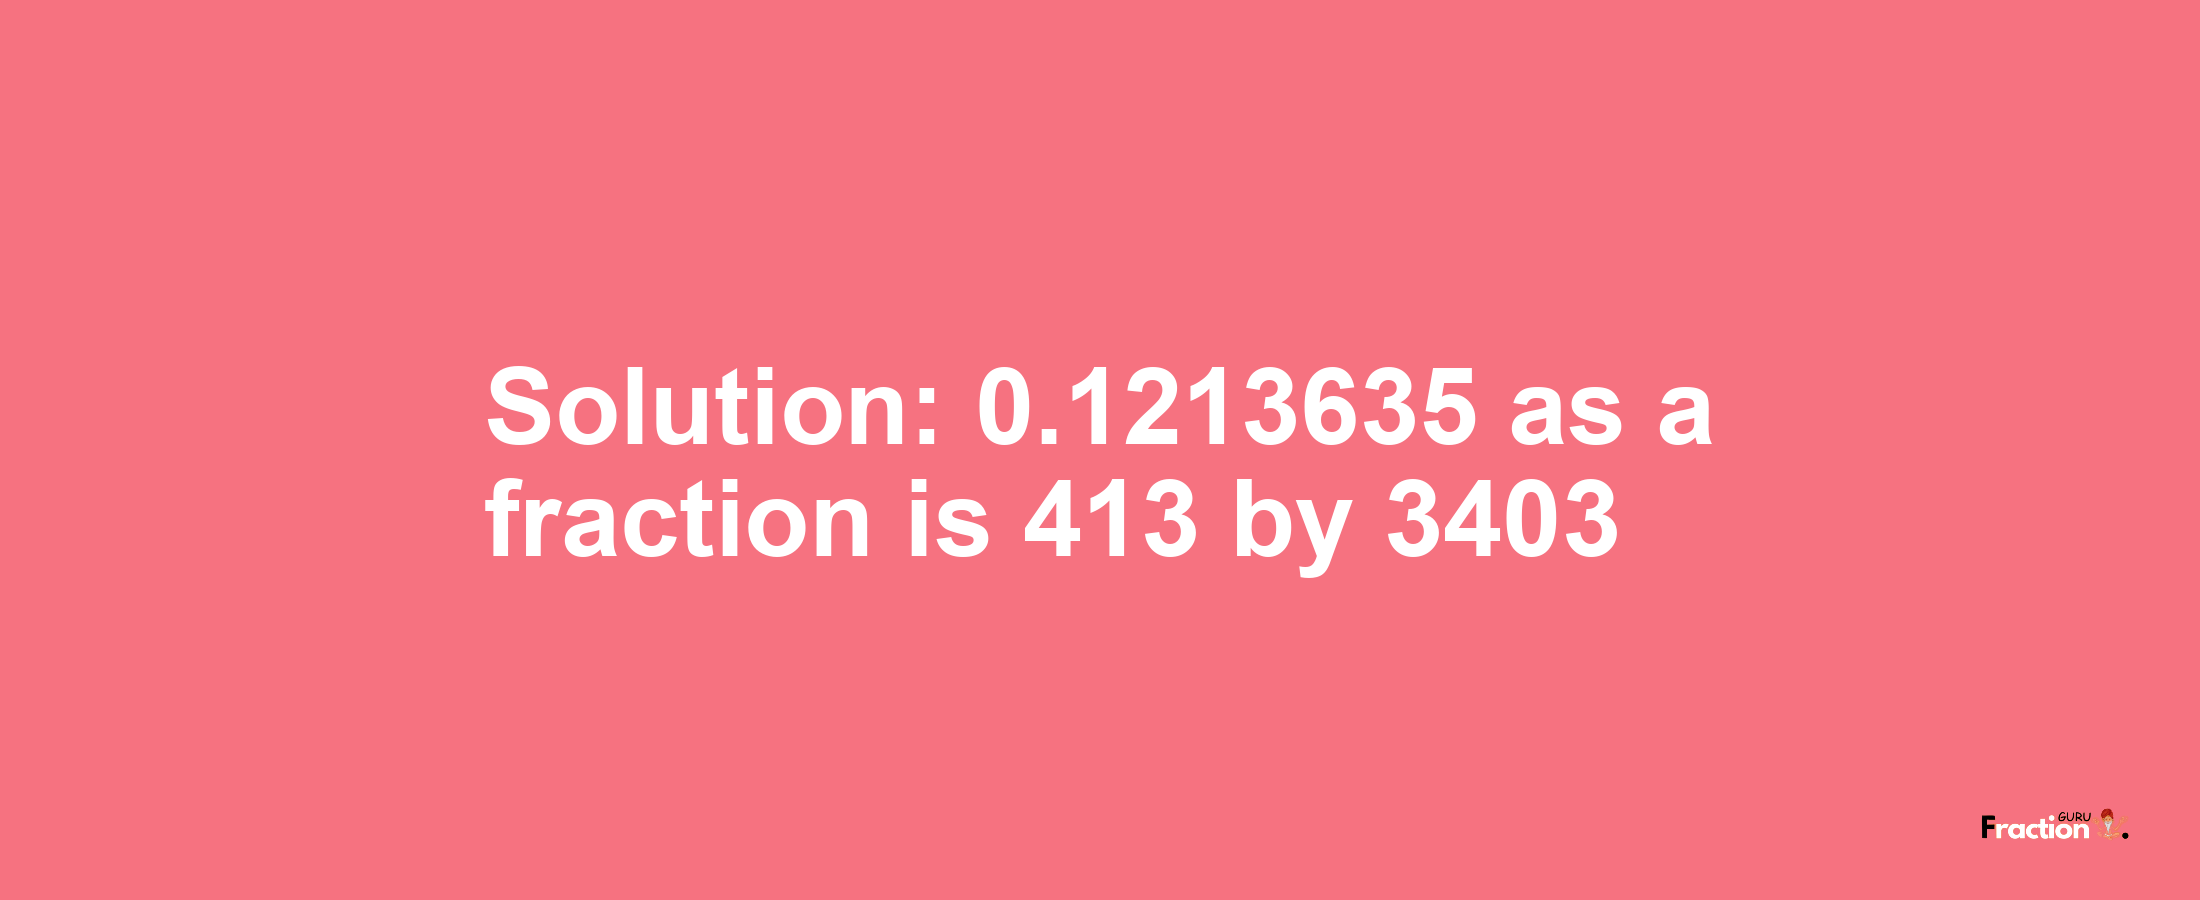 Solution:0.1213635 as a fraction is 413/3403